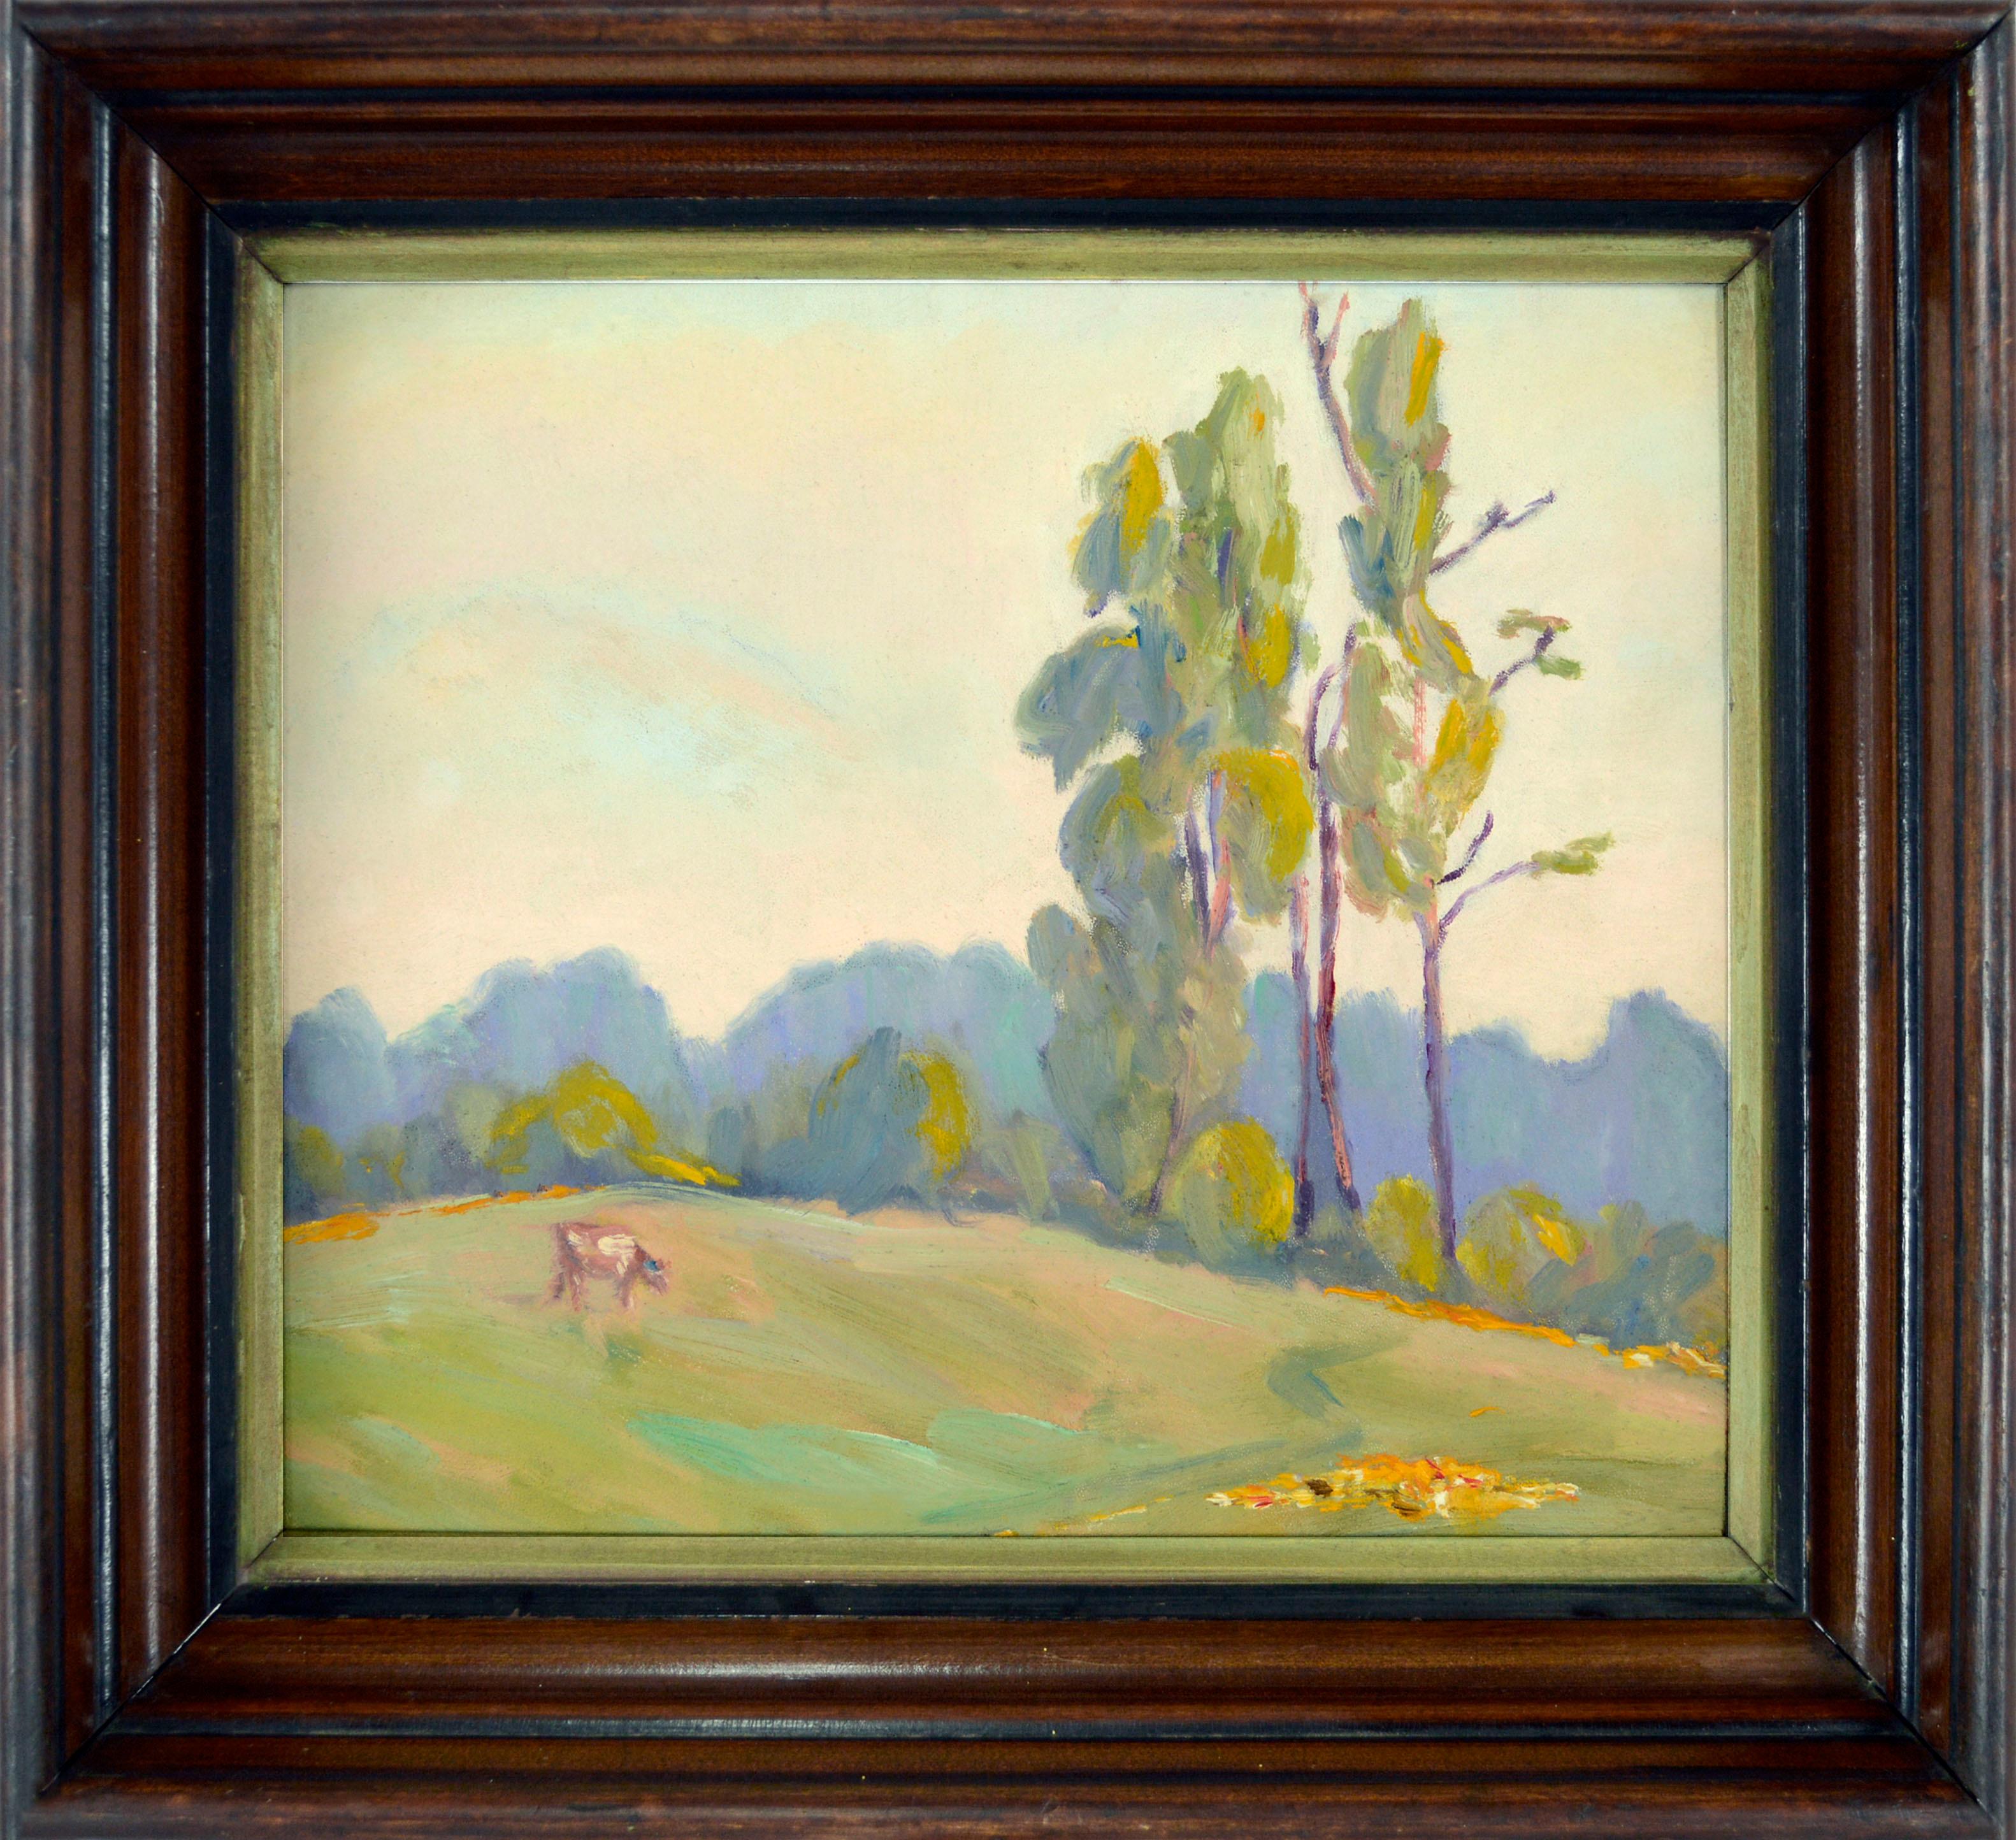 Unknown Landscape Painting - Early 20th Century California Pasture with Cow & Eucalyptus Trees Landscape